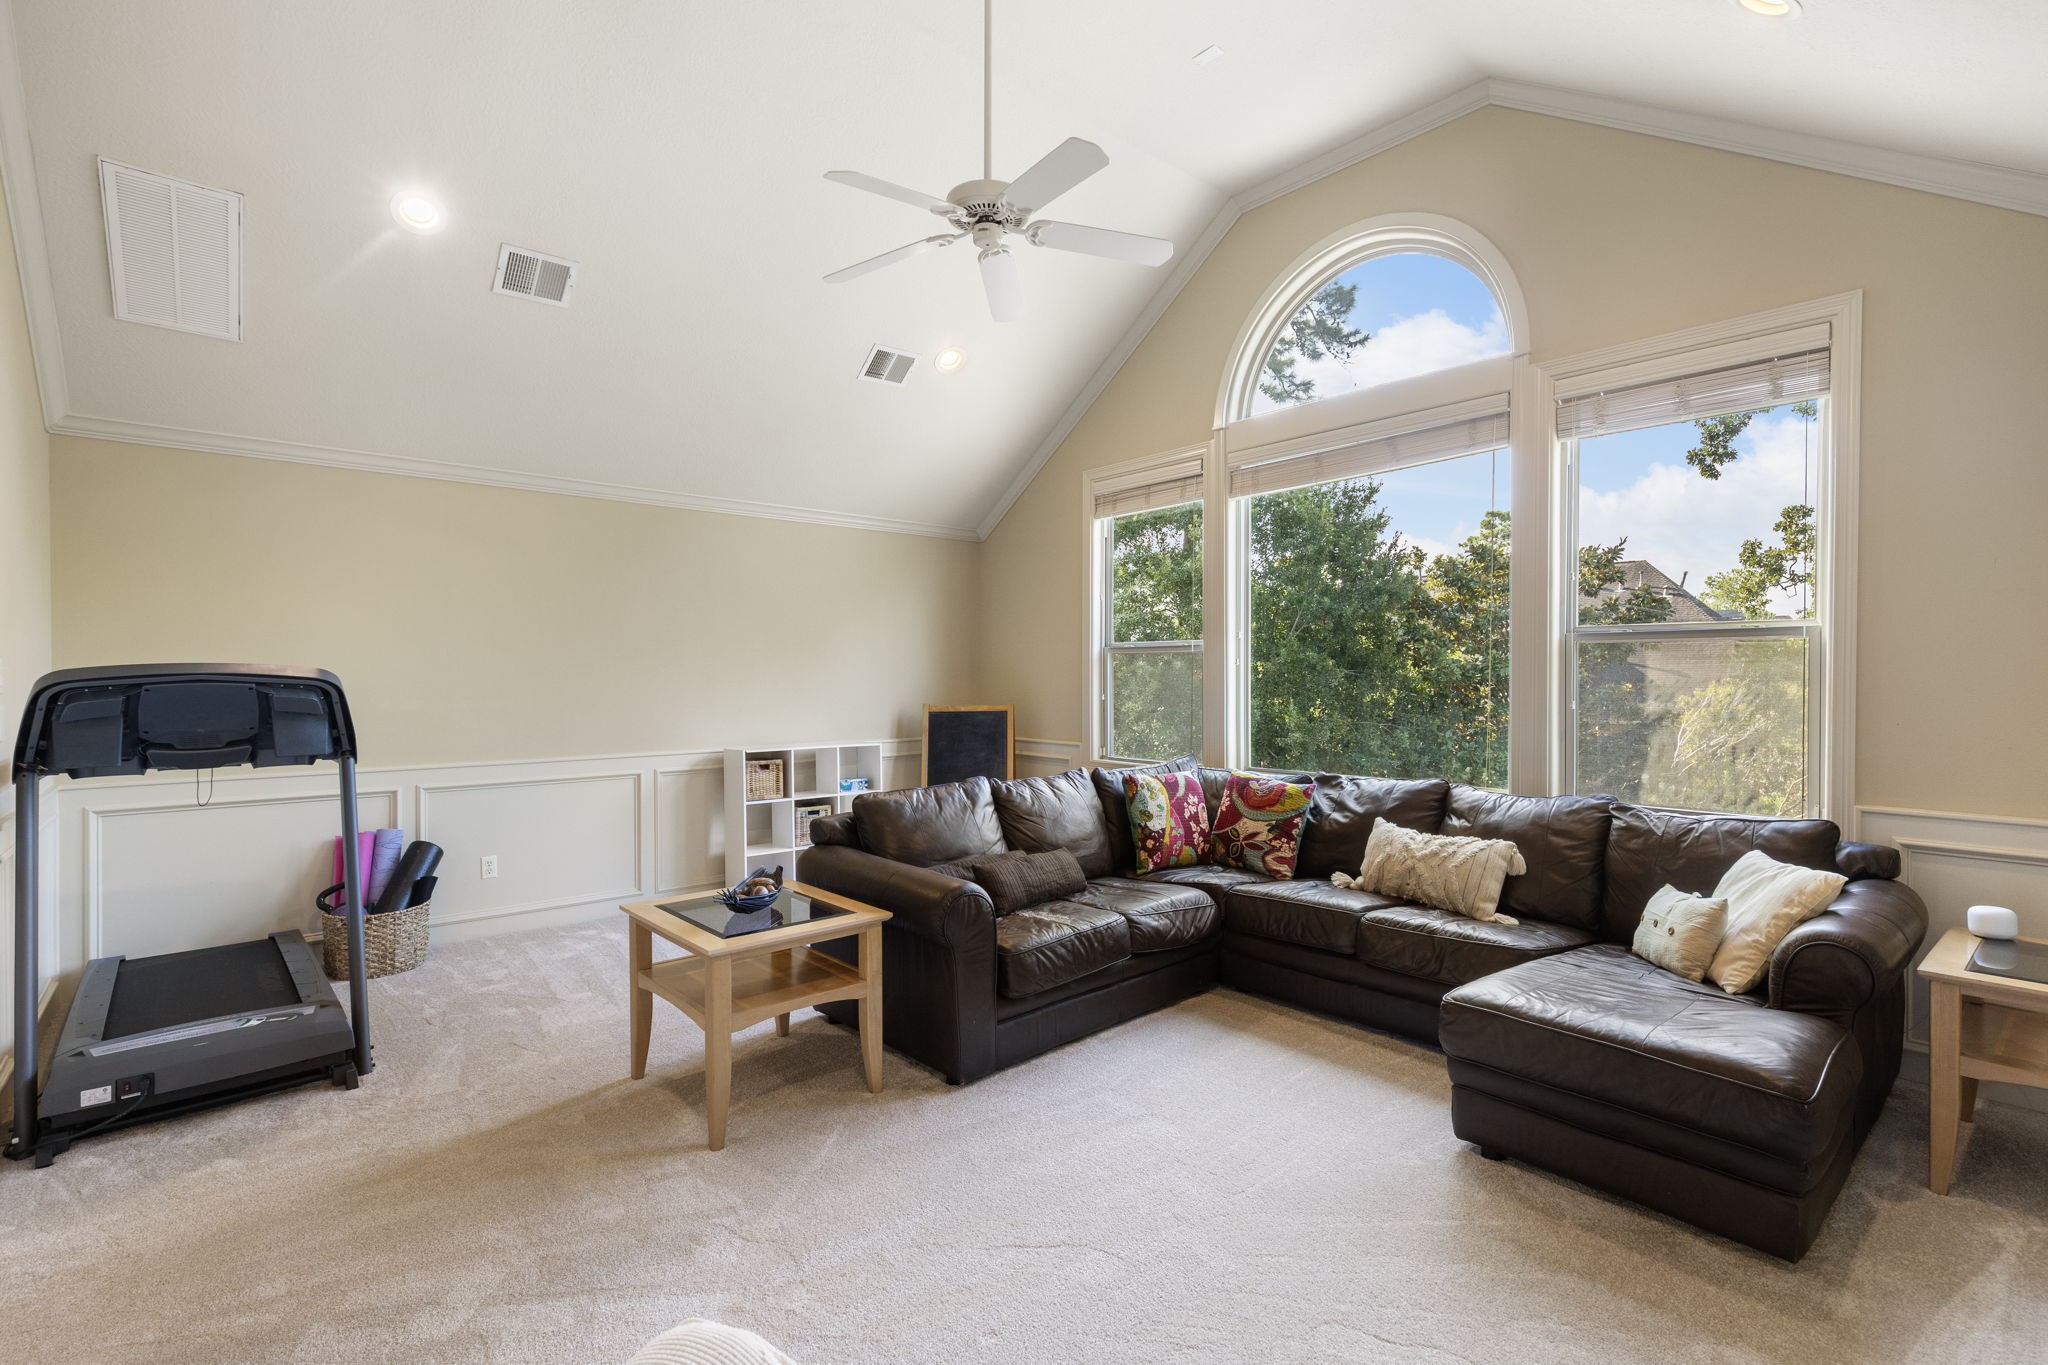 The cozy game room also has a vaulted ceiling with large wall of windows allowing for lots of natural light, neutral paint, crown moulding and wainscoting.